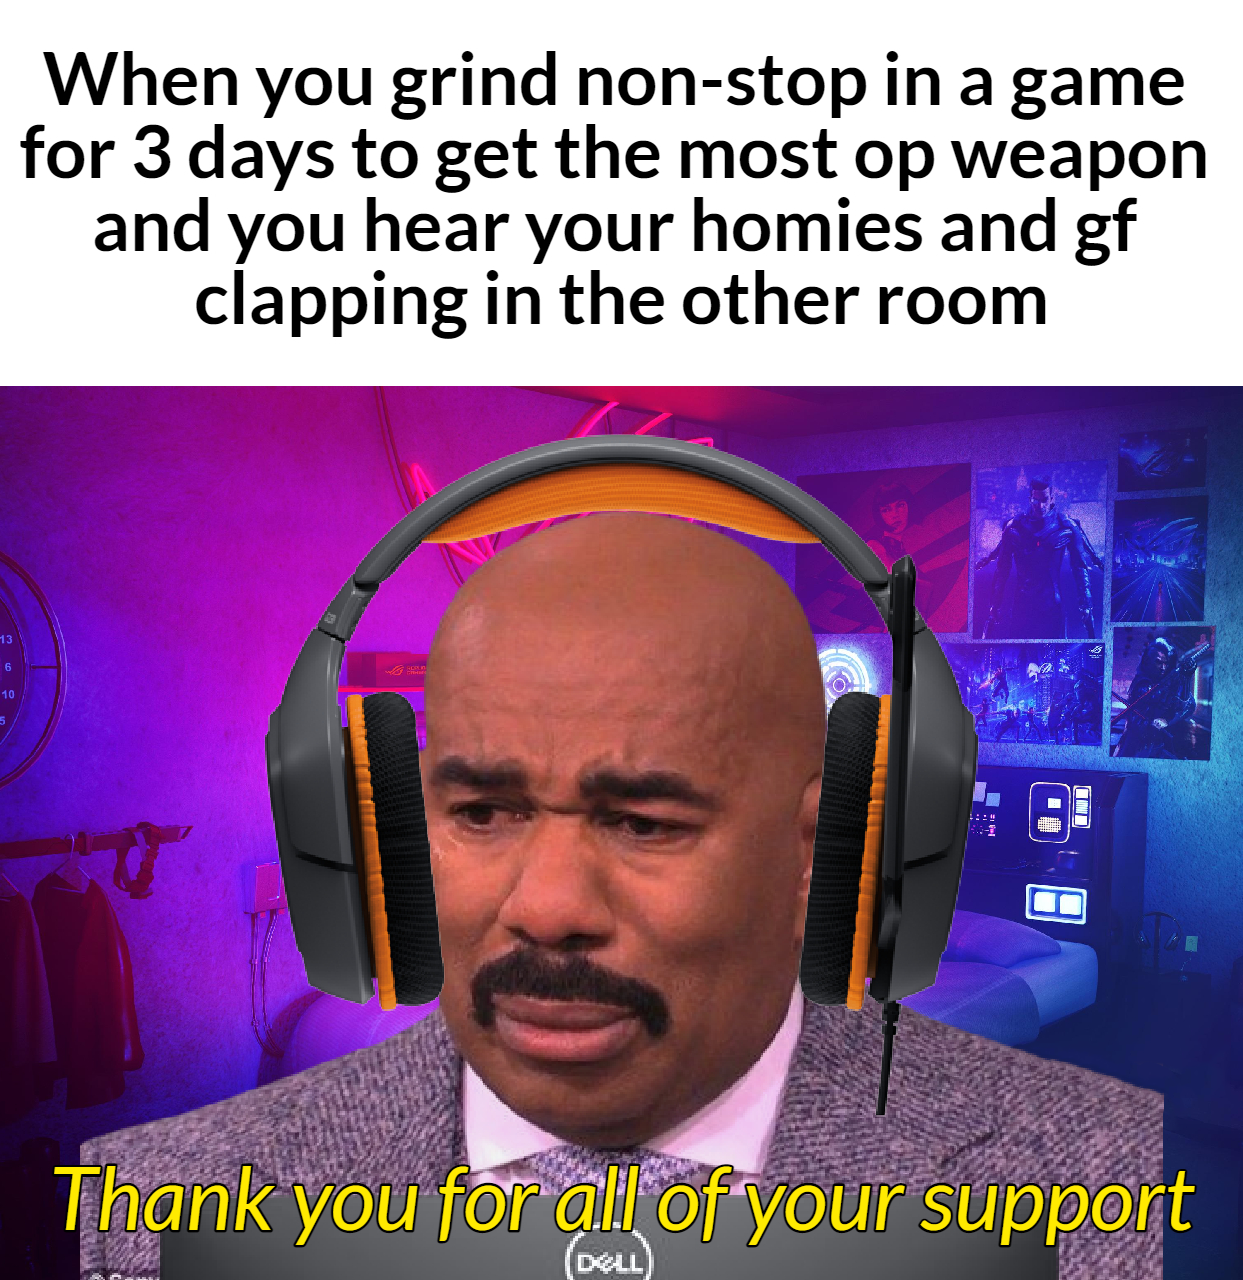 dank memes - funny memes - photo caption - When you grind nonstop in a game for 3 days to get the most op weapon and you hear your homies and gf clapping in the other room Thank you for all of your support Joel